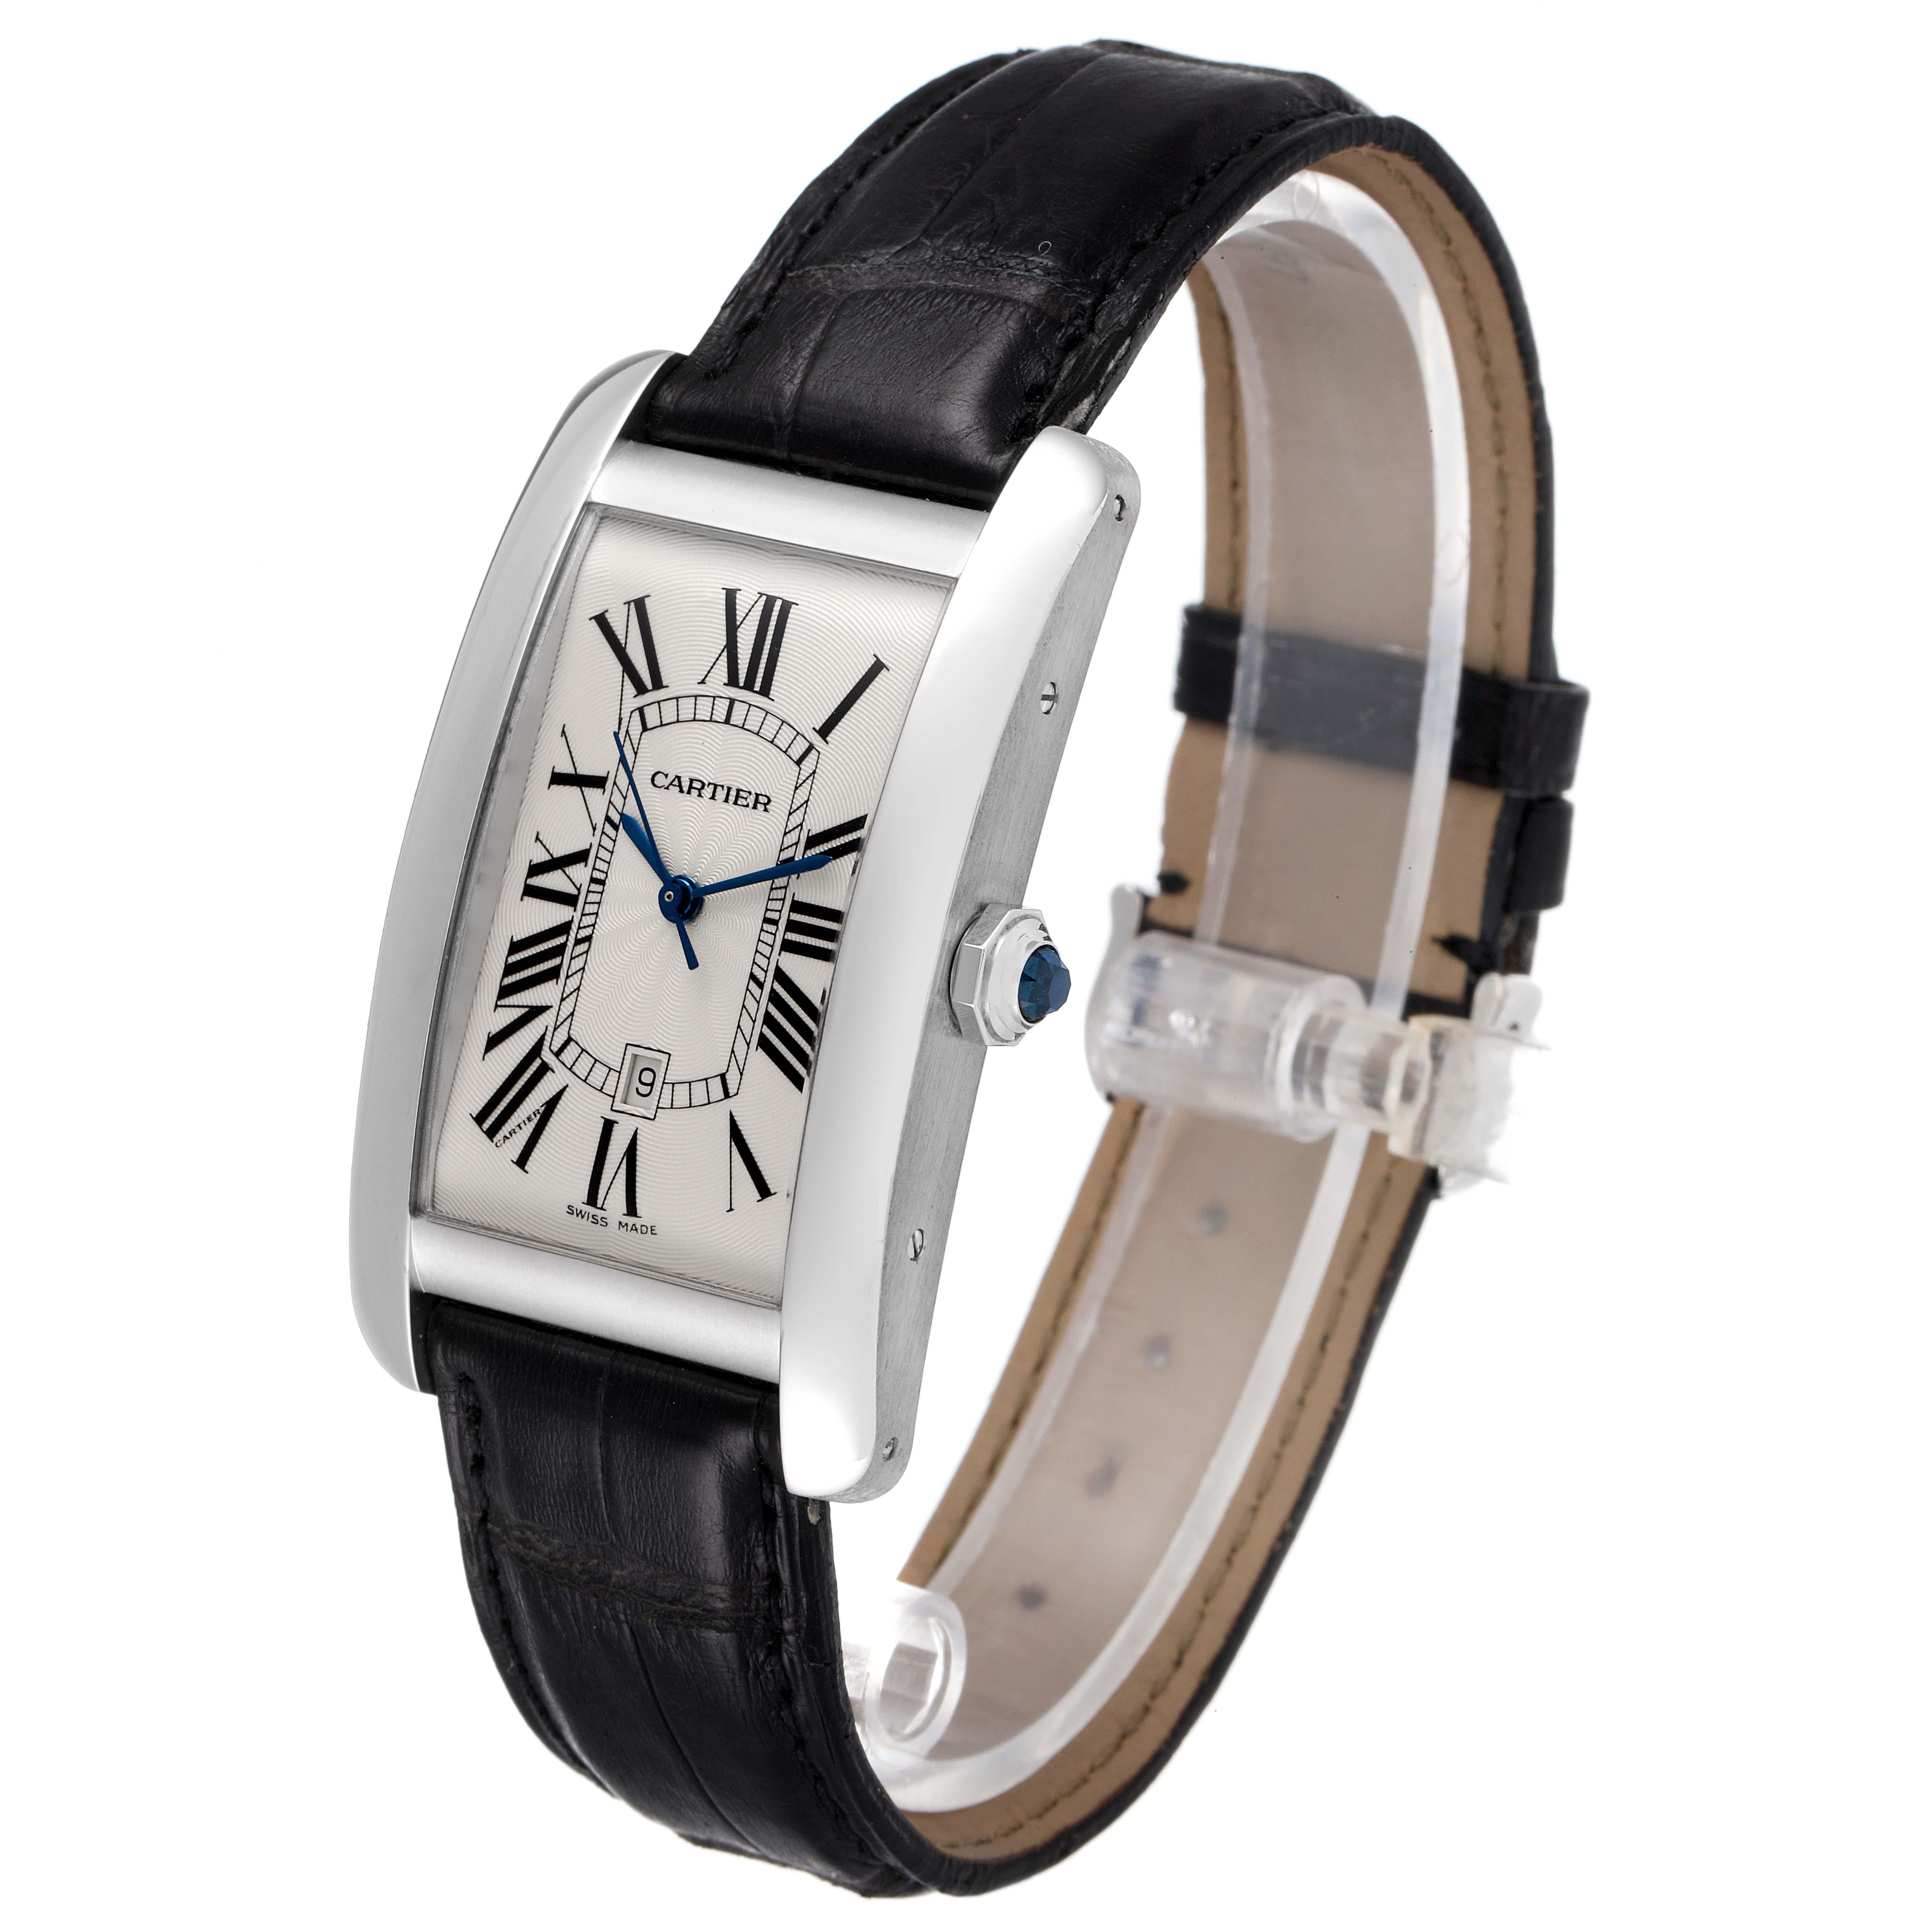 Cartier Tank Americaine 18K White Gold Large Mens Watch W2603256 1